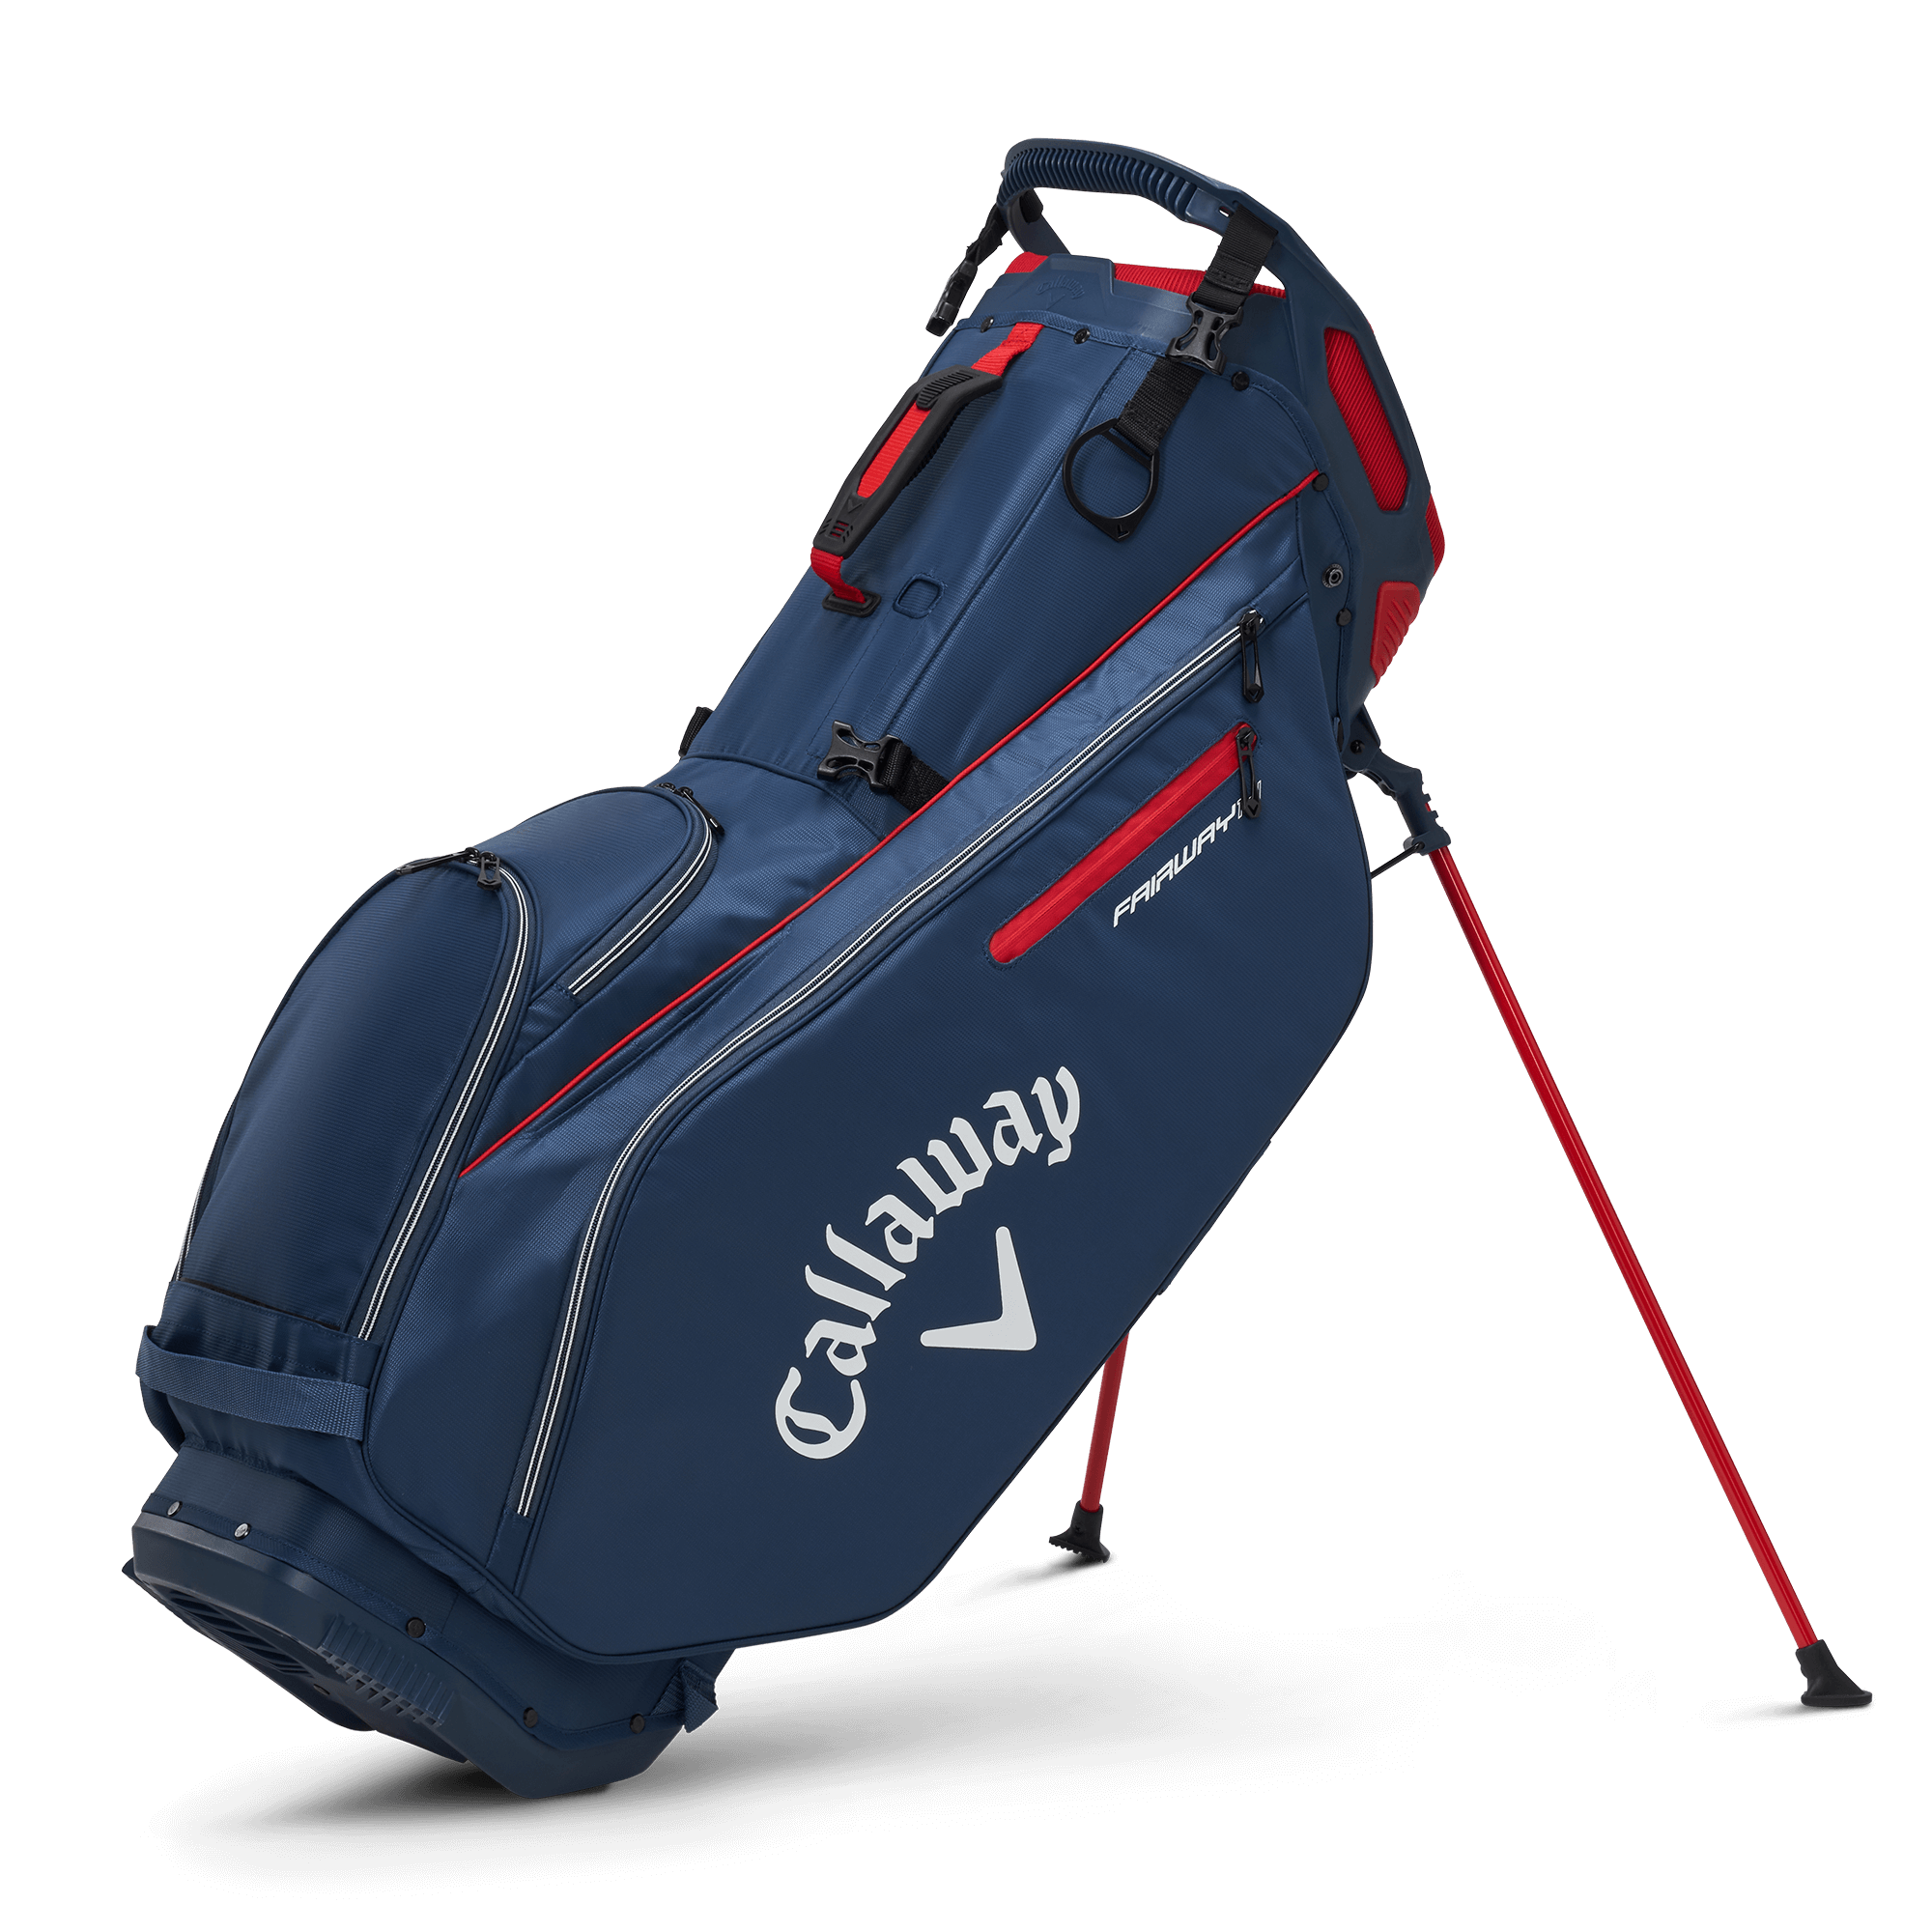 2022 Golf Carry Bag Buyers Guide